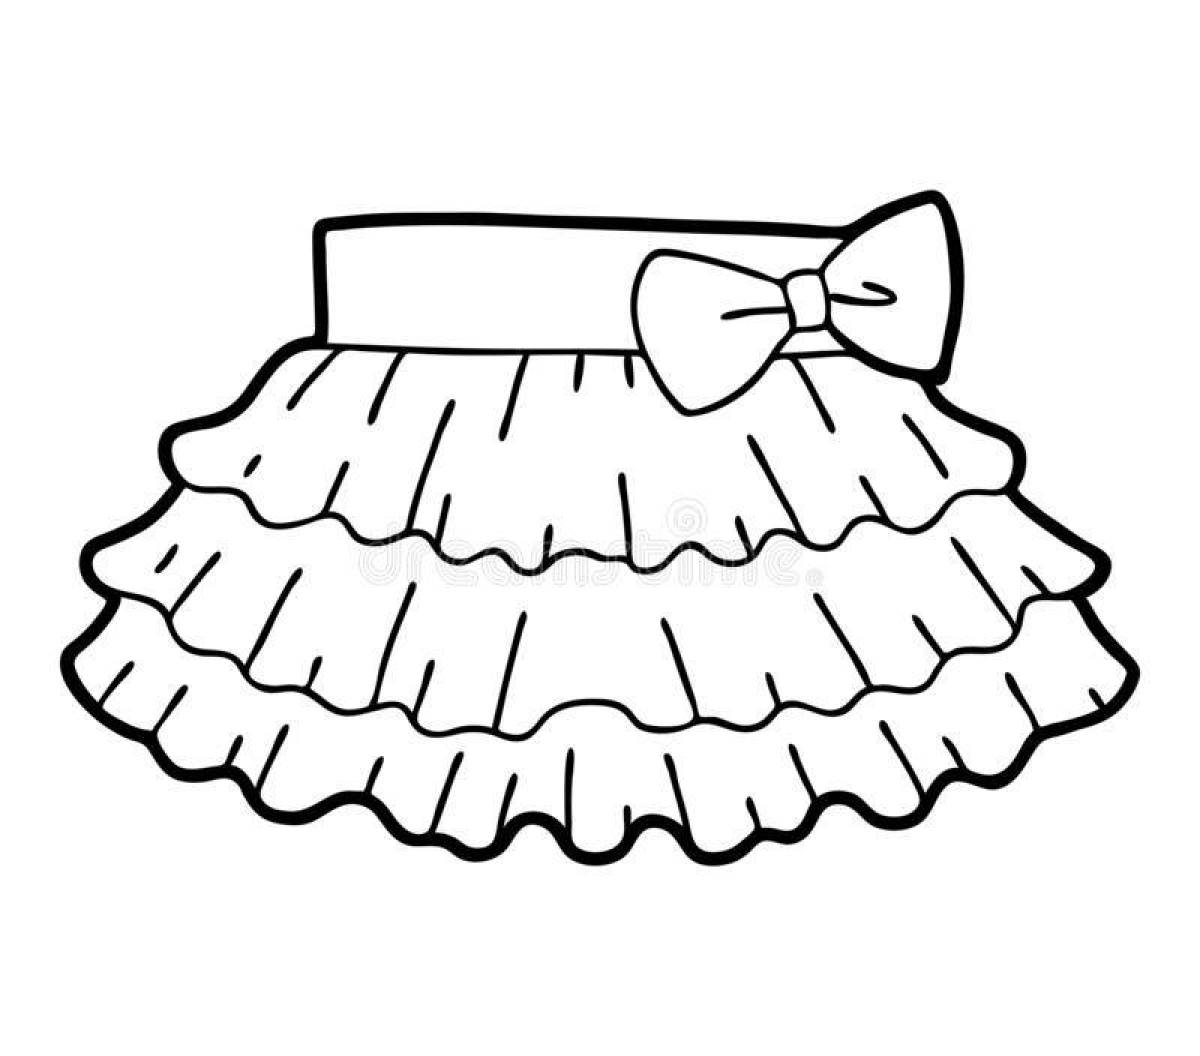 Fancy skirt coloring page